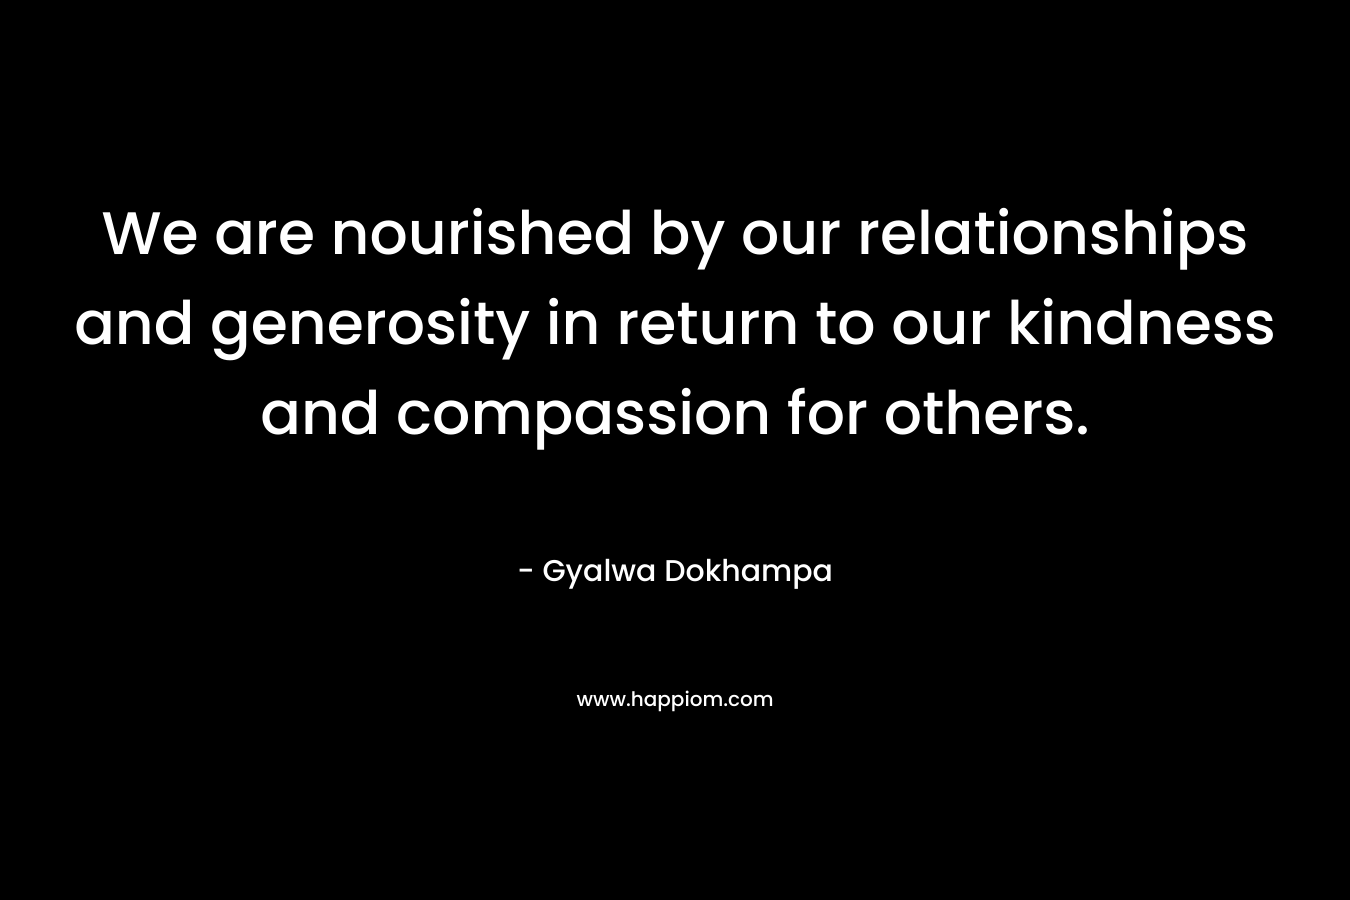 We are nourished by our relationships and generosity in return to our kindness and compassion for others. – Gyalwa Dokhampa